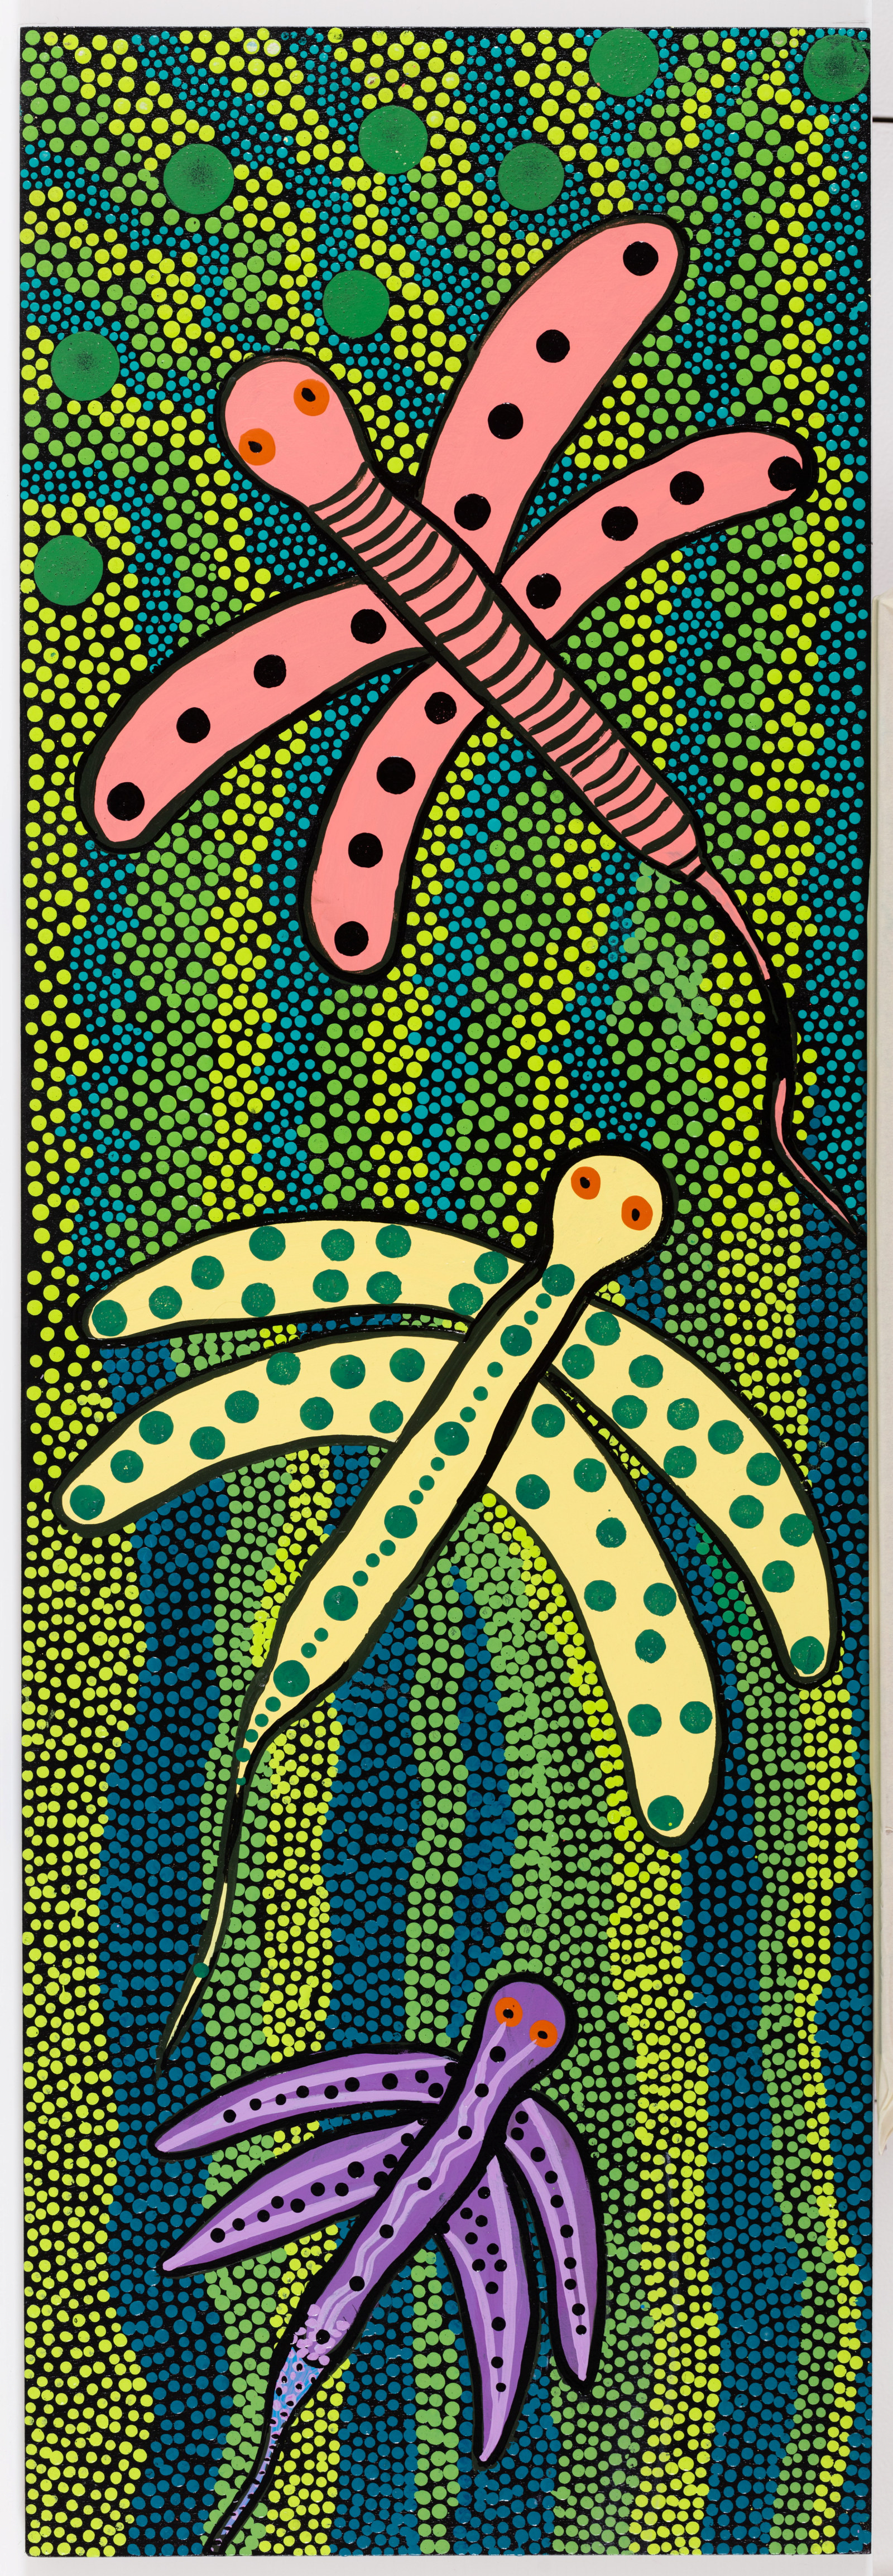 Dragonflies, Meahala Langlo-Brown, 2022, acrylic on plywood board, 122.5cm x 41cm
Dragonflies are a daily part of Coomaditchie Lagoon.